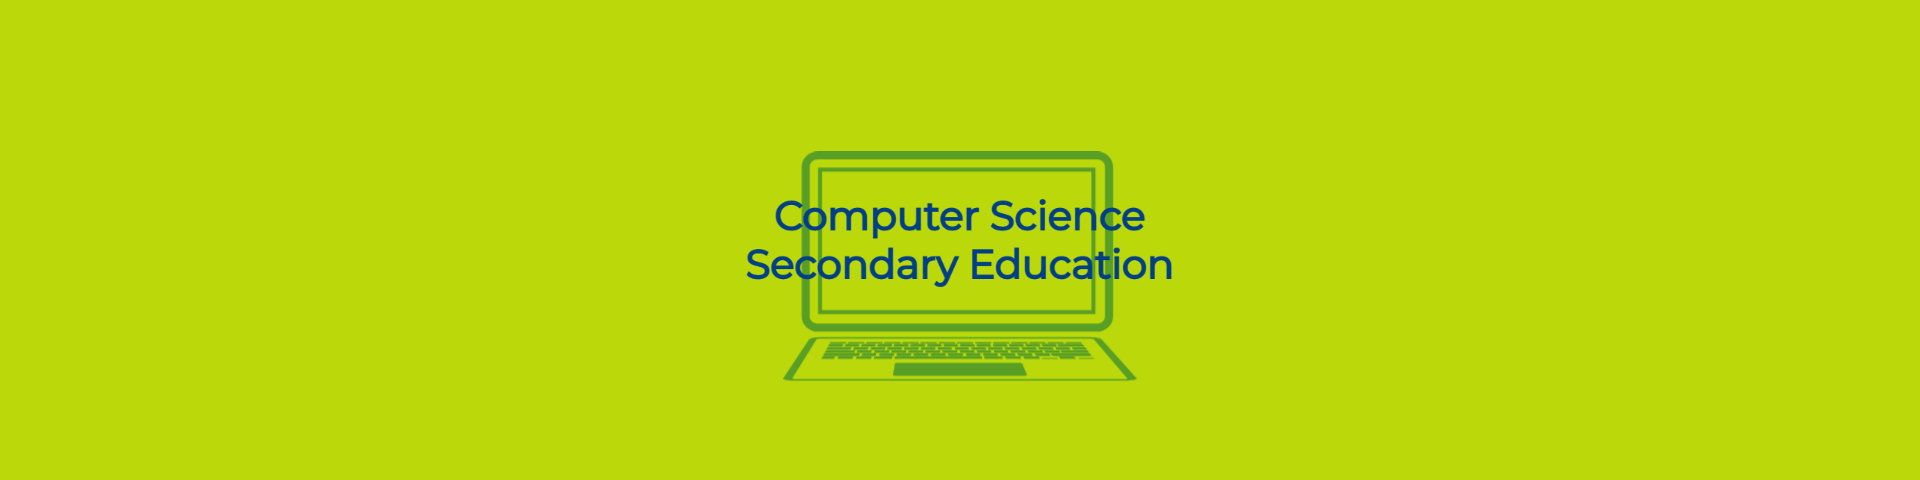 A line drawing of a computer screen with overlaid text that reads "Computer Science Secondary Education"